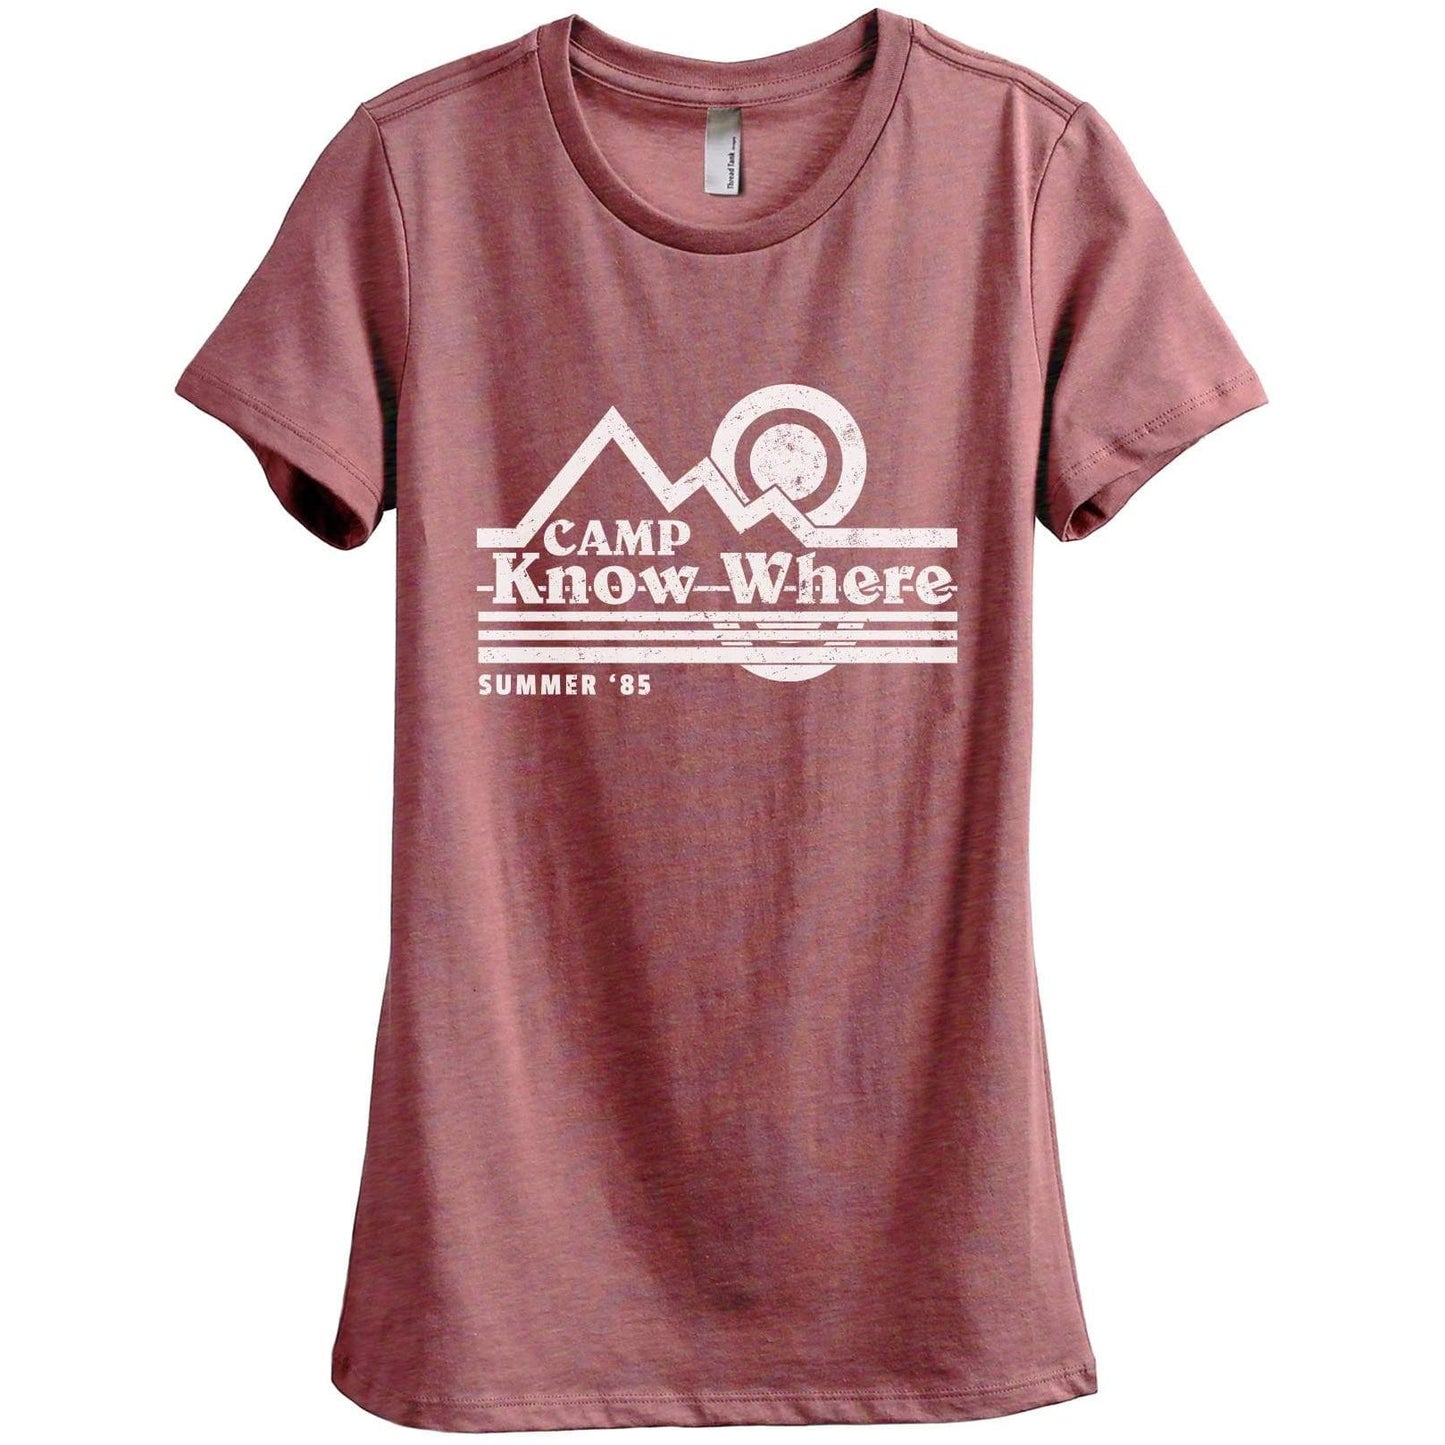 Camp Know Where - Thread Tank | Stories You Can Wear | T-Shirts, Tank Tops and Sweatshirts